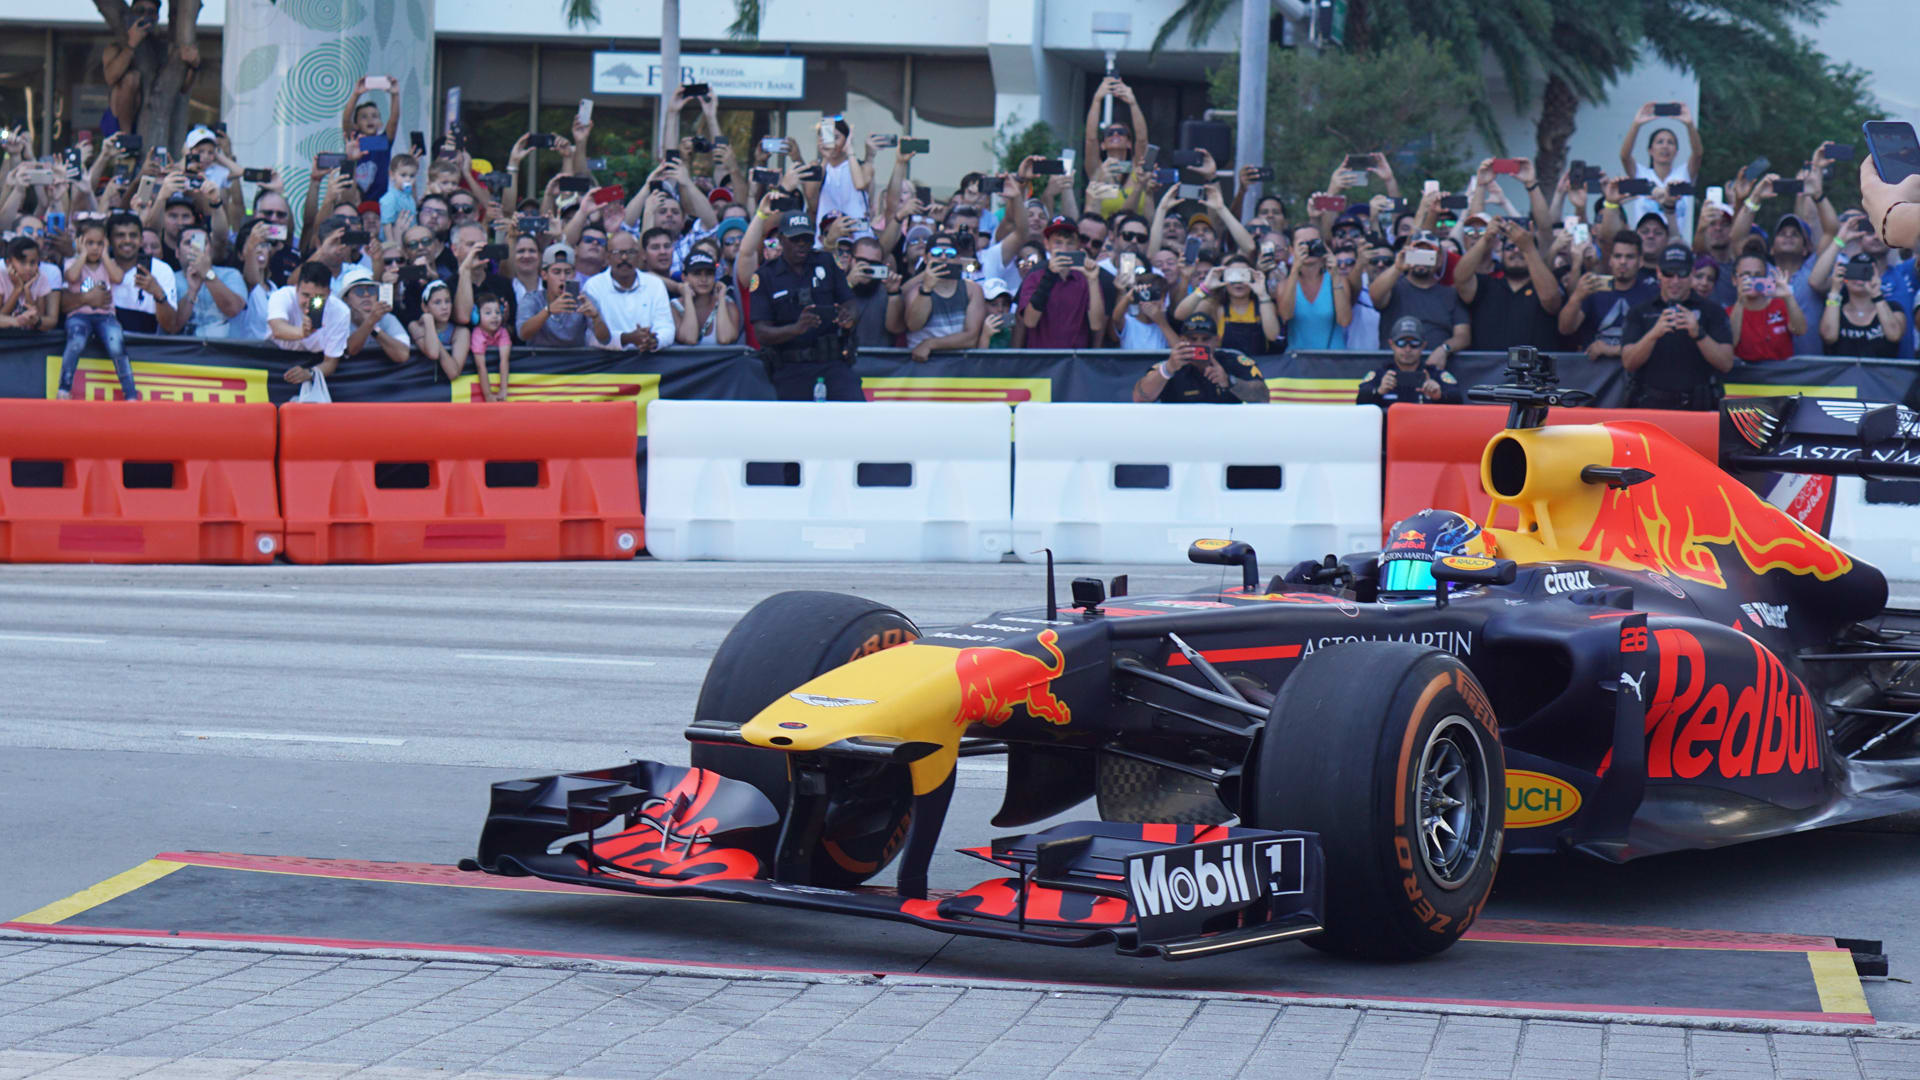 Miami turns out in force for live F1 car run